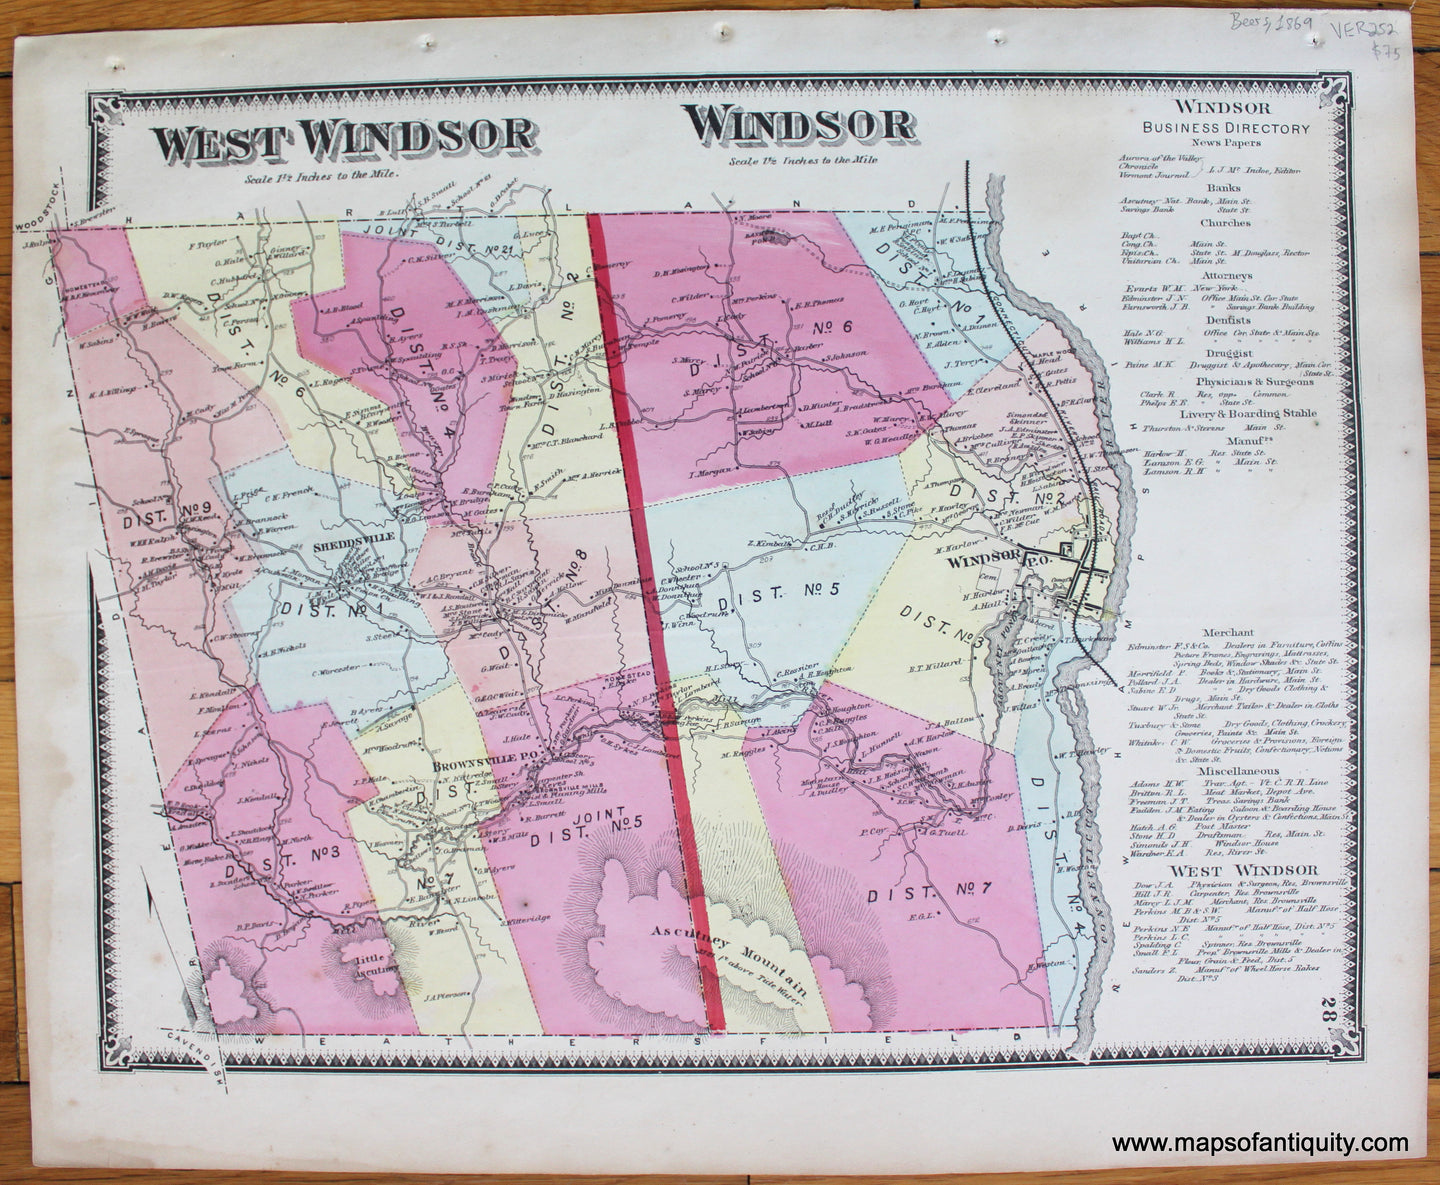 Antique-Map-Vermont-VT-Windsor-County-Town-West-Windsor-Beers-1869-1860s-1800s-19th-Century-Maps-of-Antiquity